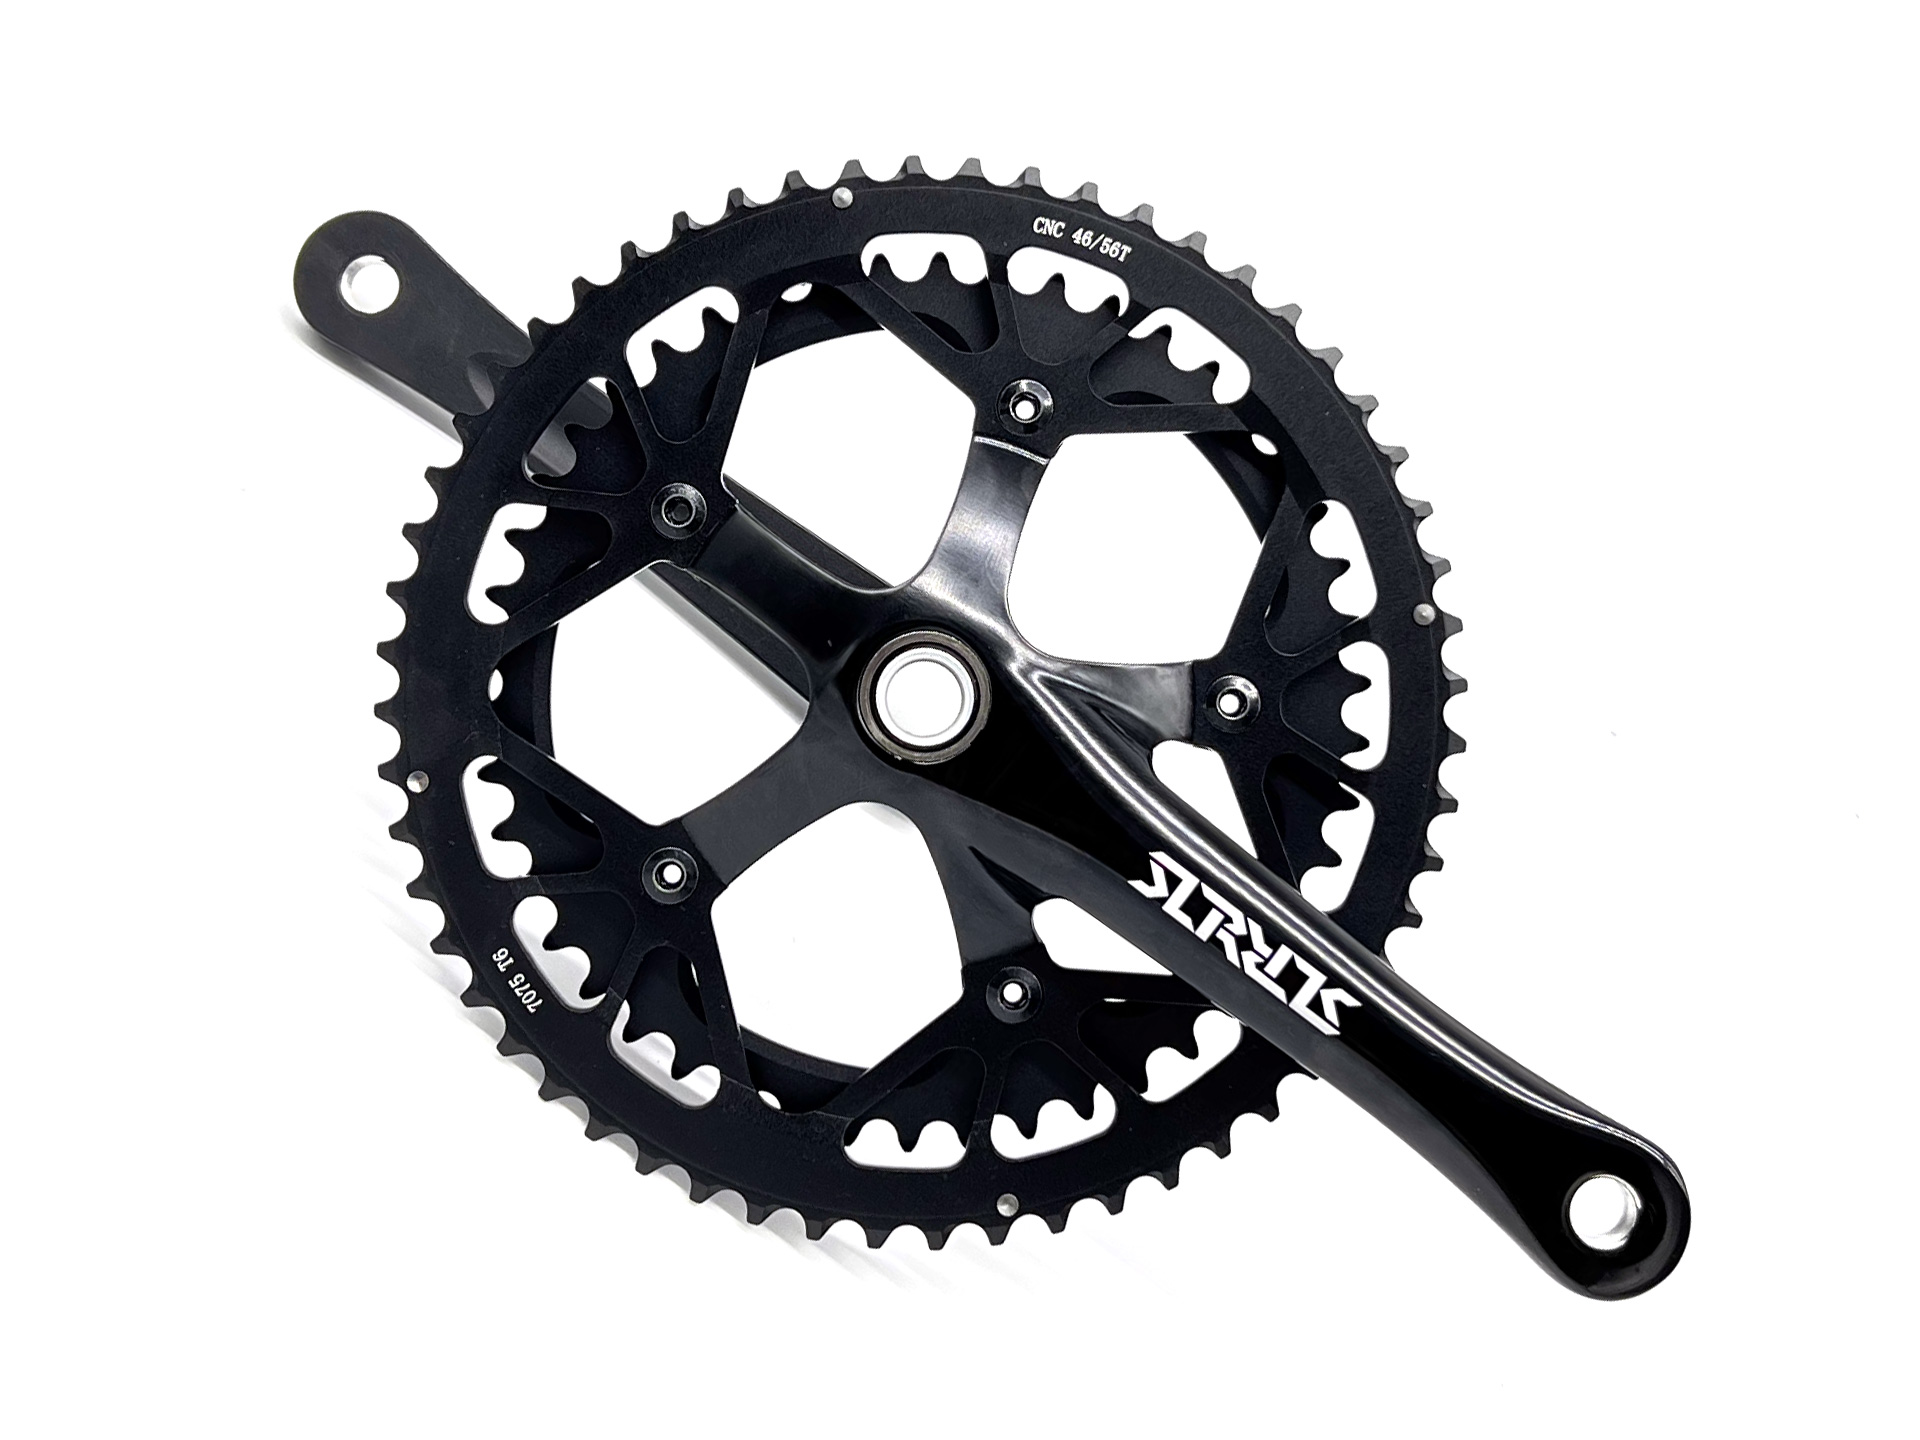 SLR RTL Hollow Axle Crankset - 53/39T Extended Axle for Birdy Brompton